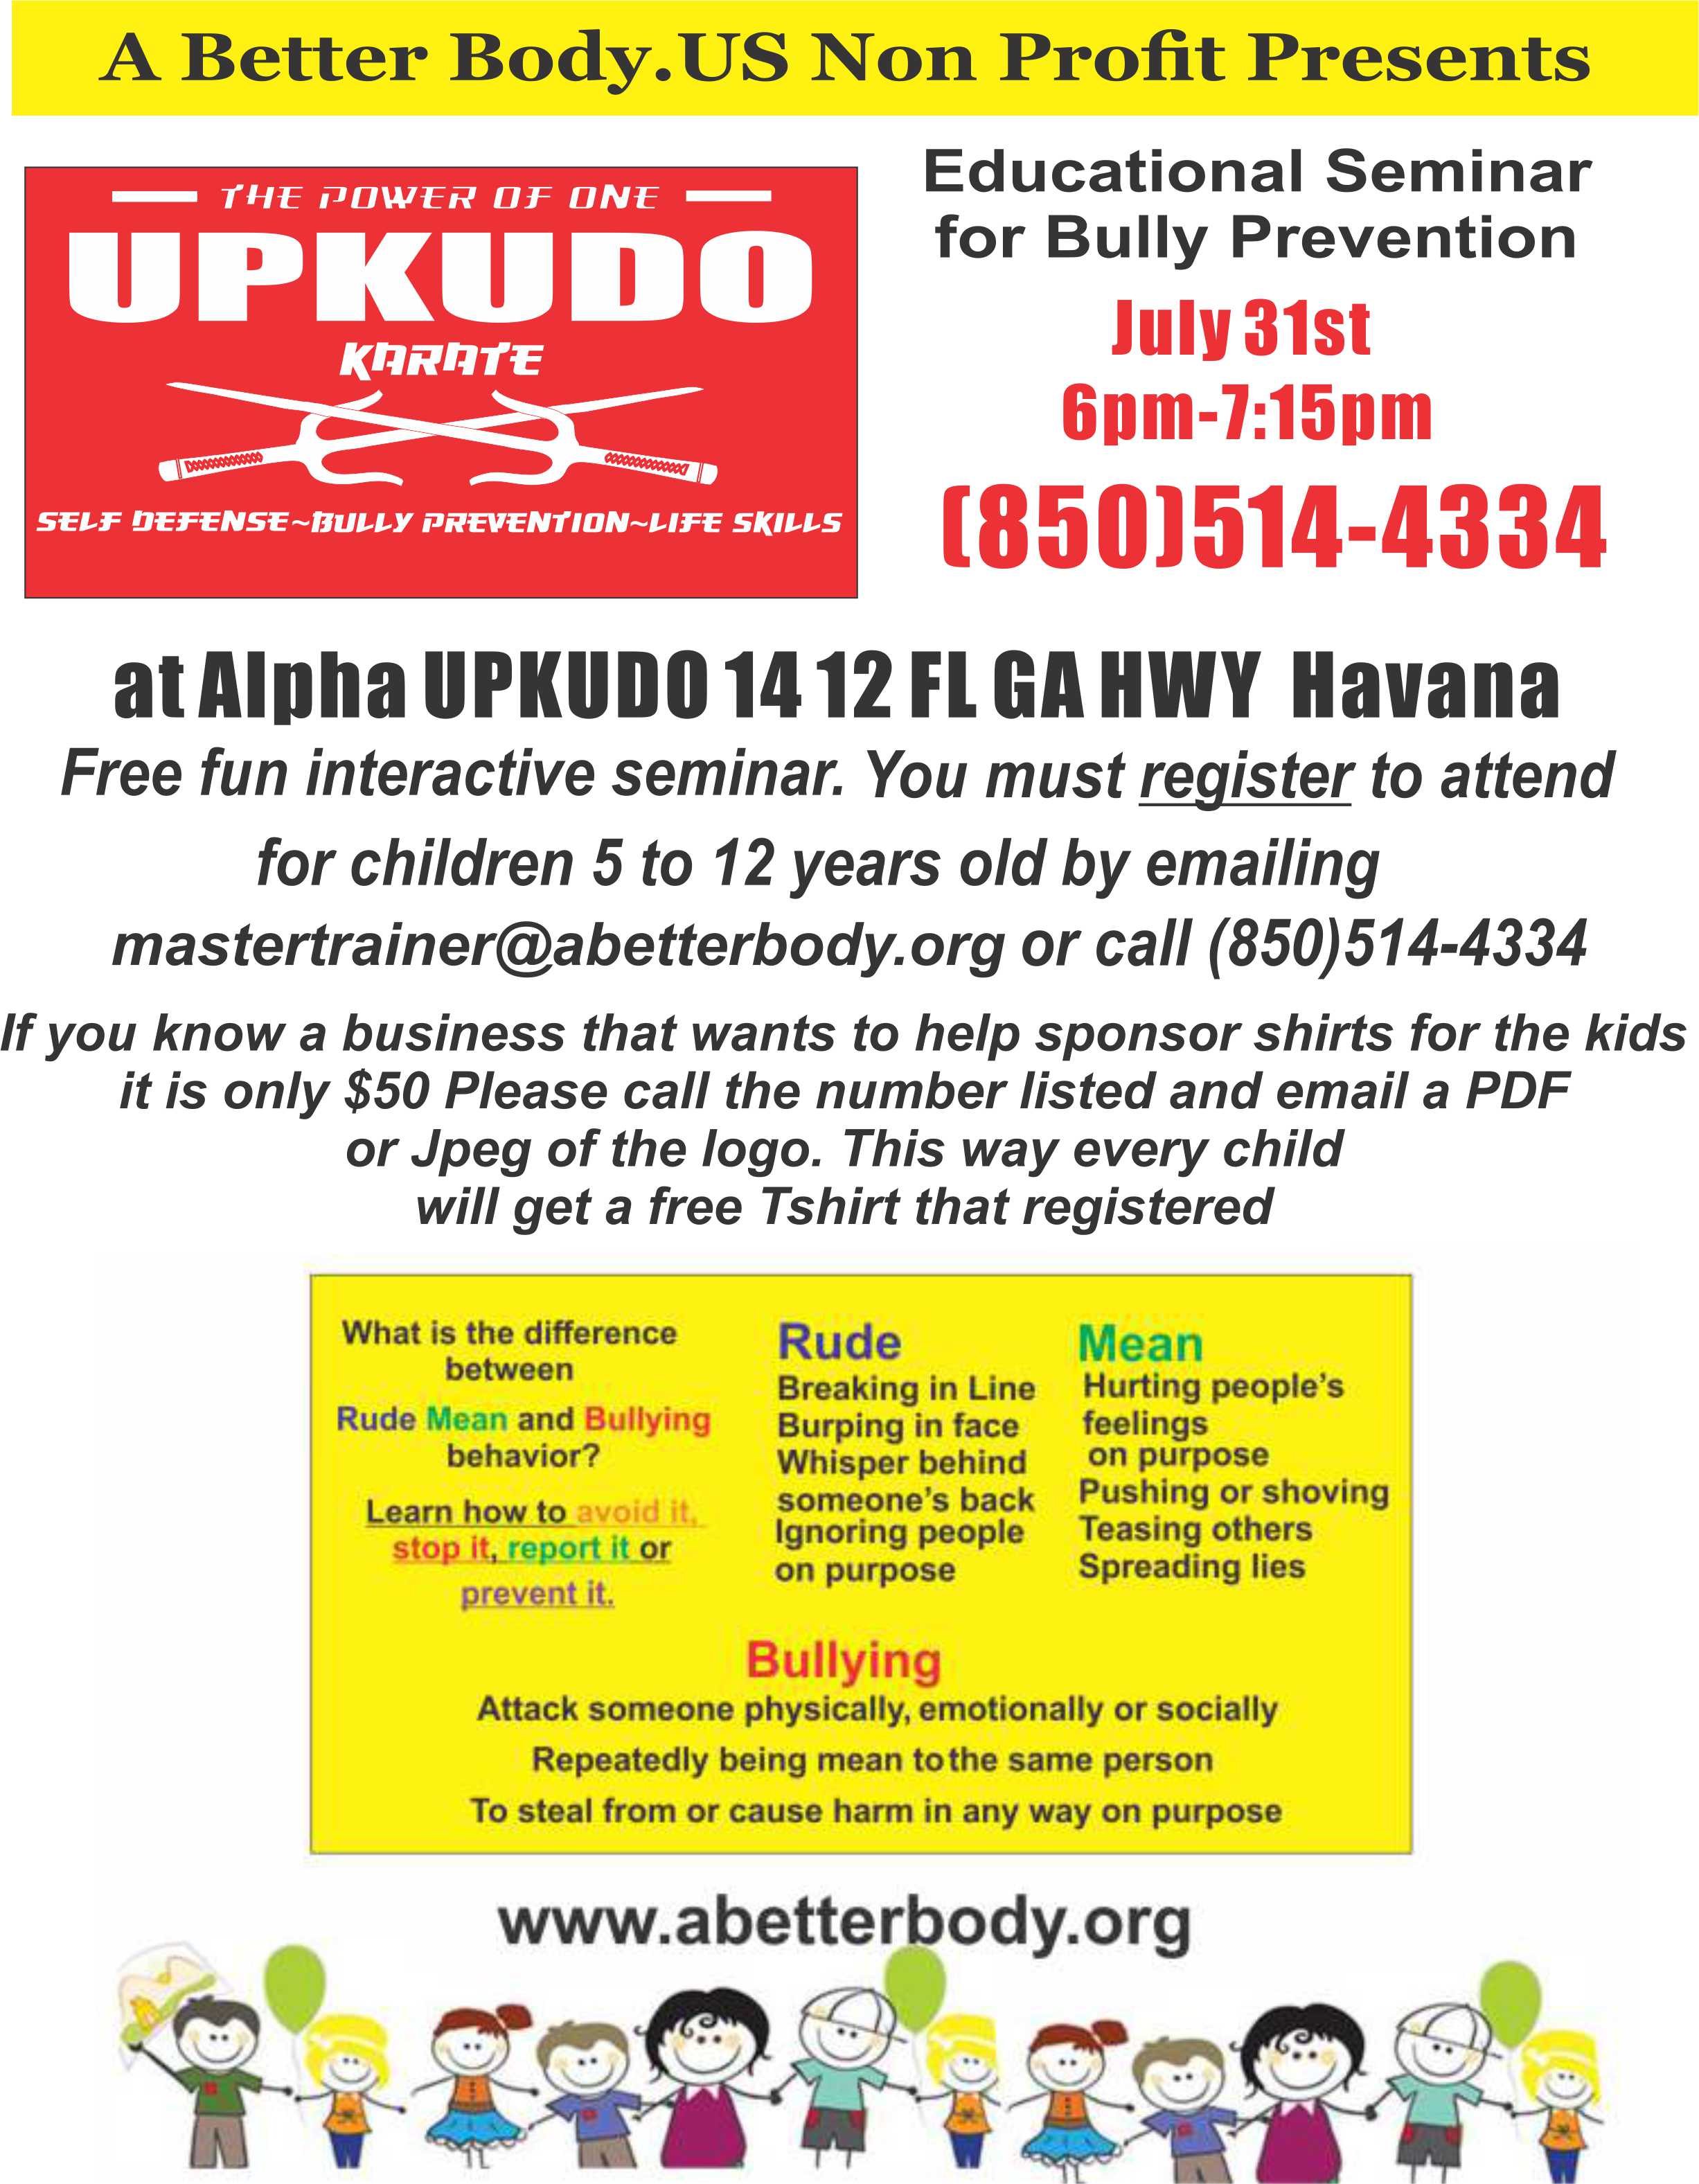 Educational Seminar for Bully Prevention. July 31st 6pm to 7:15pm. 850-514-4334. Located at Alpha UPKUDO 1412 FL GA HWY Havana. Free fun interactive seminar. You must register to attend for children 5 to 12 years old by emailing mastertrainer@abetterbody.org or call 850-514-4334. If you know a business that wants to help sponsor shirts for the kids it is only $50. Please call the number listed and email a PDF of JPeg of the logo. This way every child will get a free T-Shirt that registered. Visit our website at http://www.abetterbody.org.